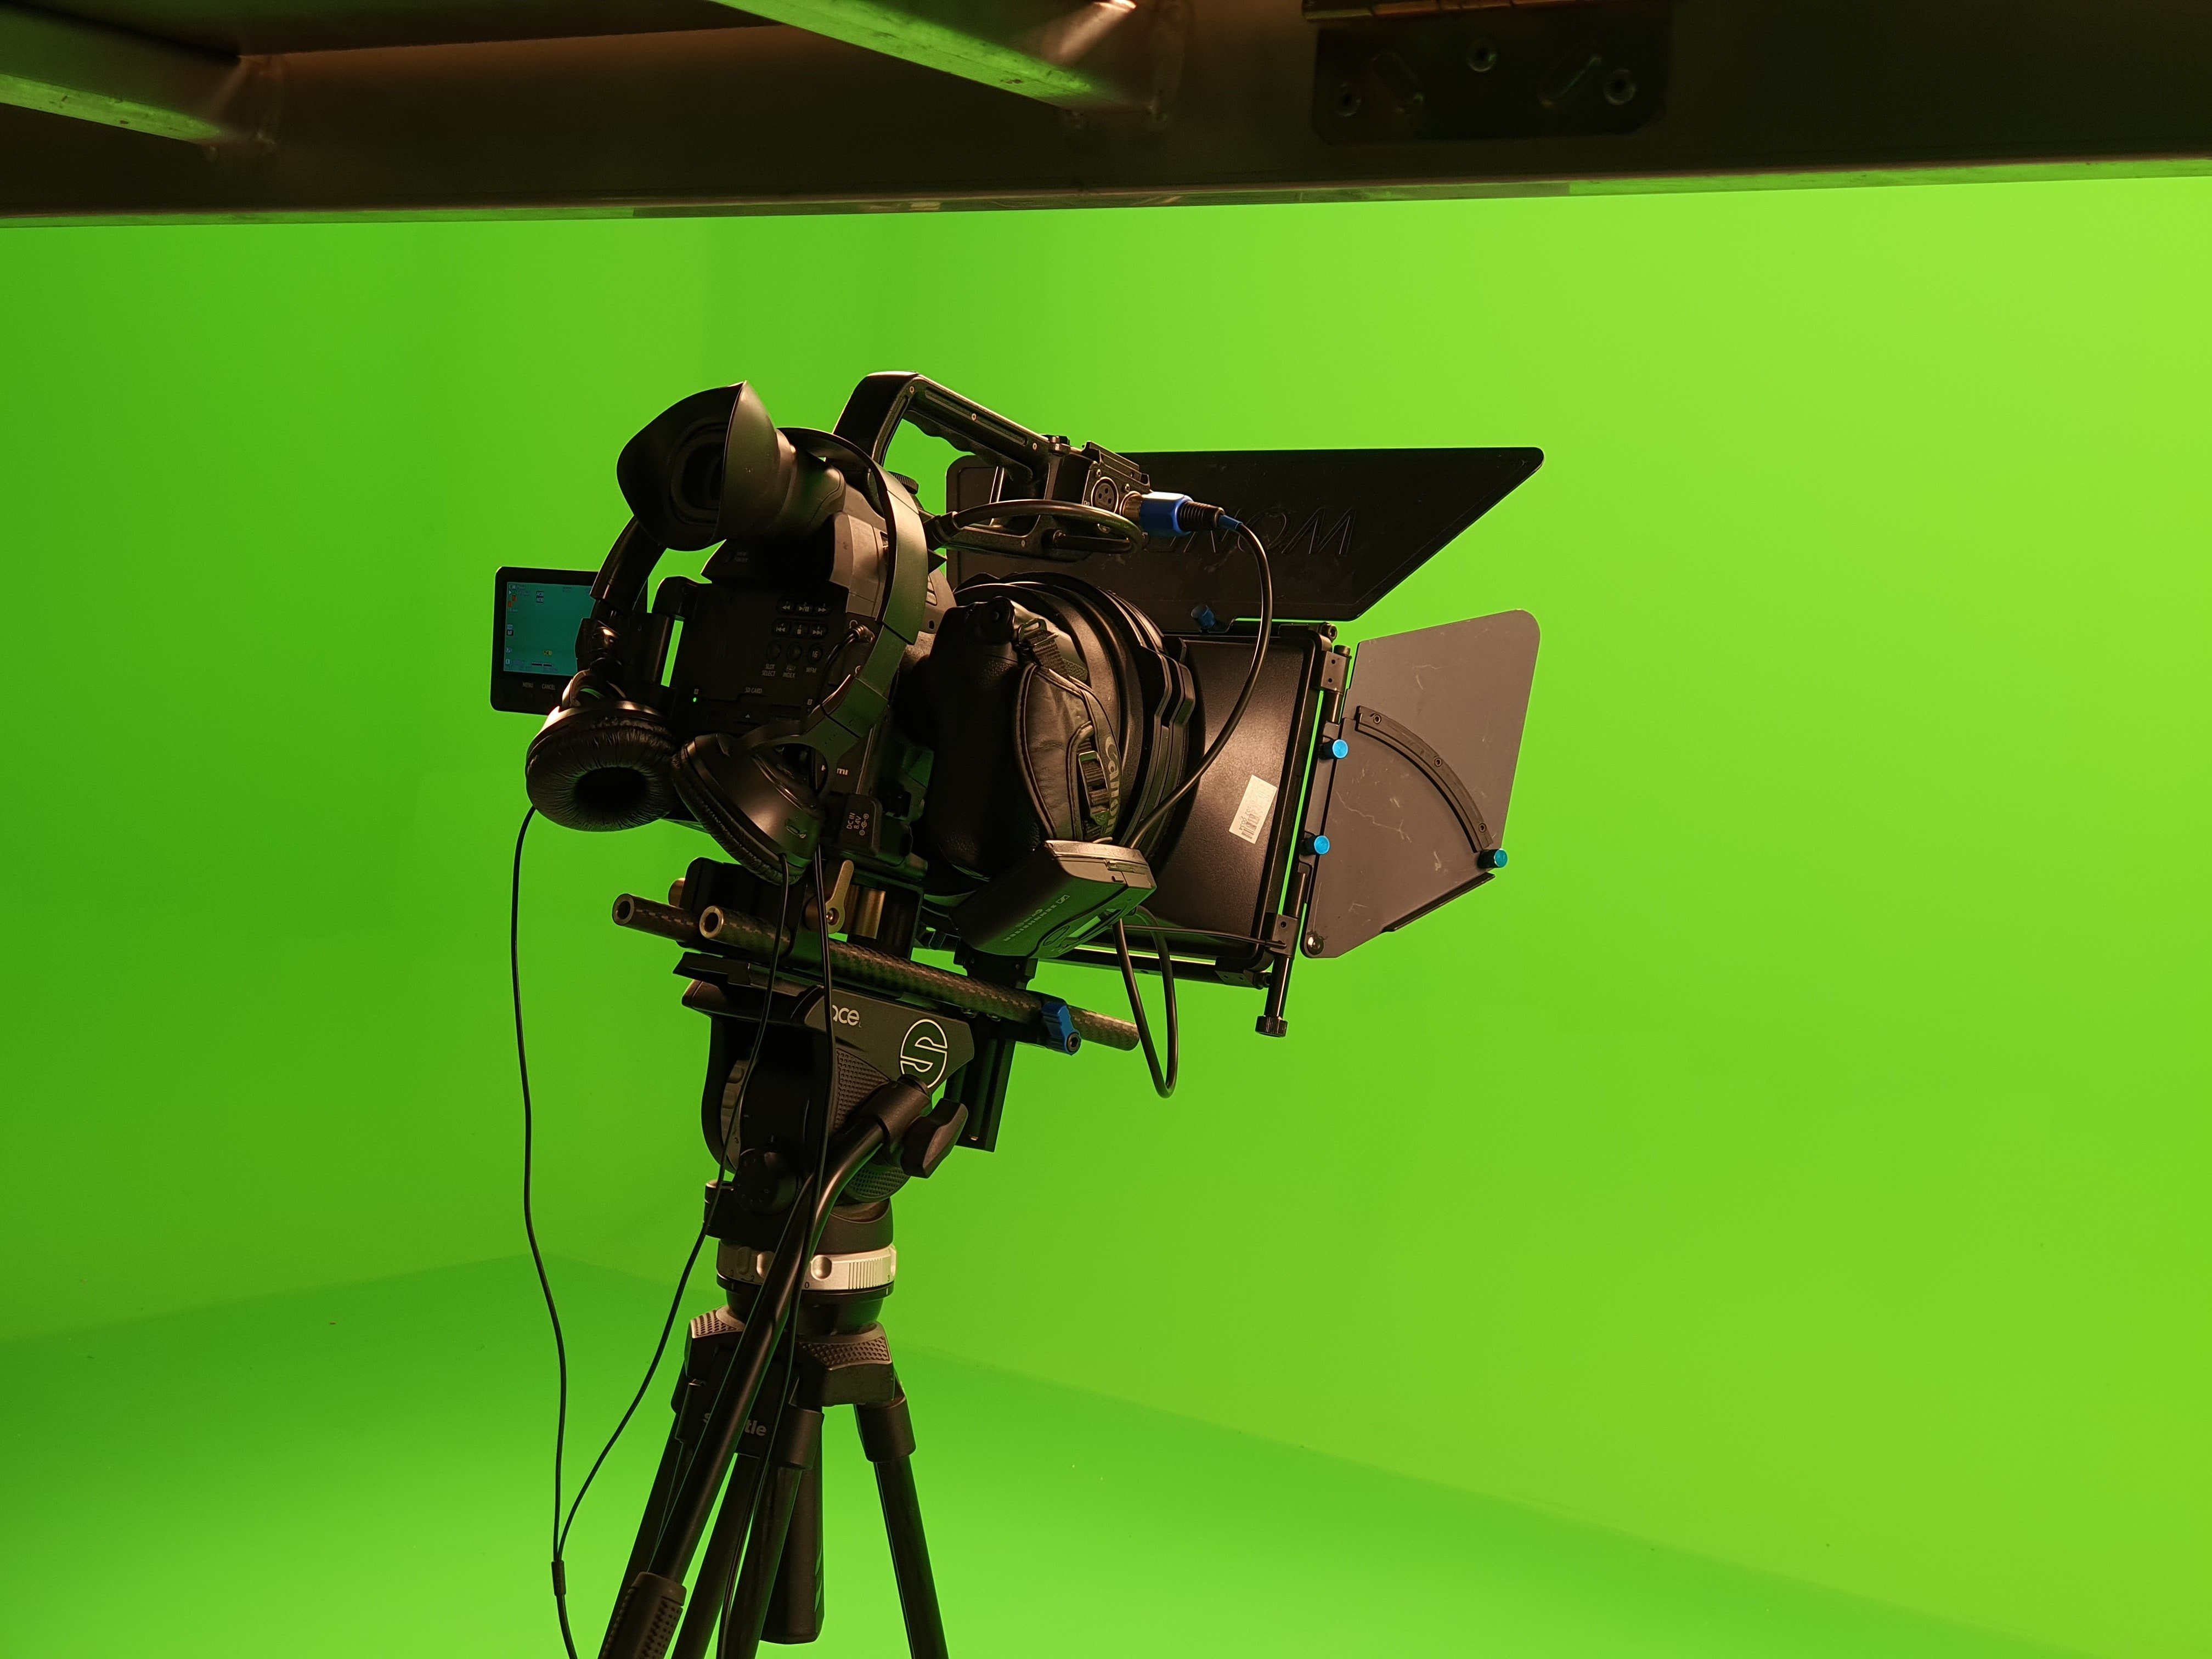 Editing Tips And Tricks For Green Screens